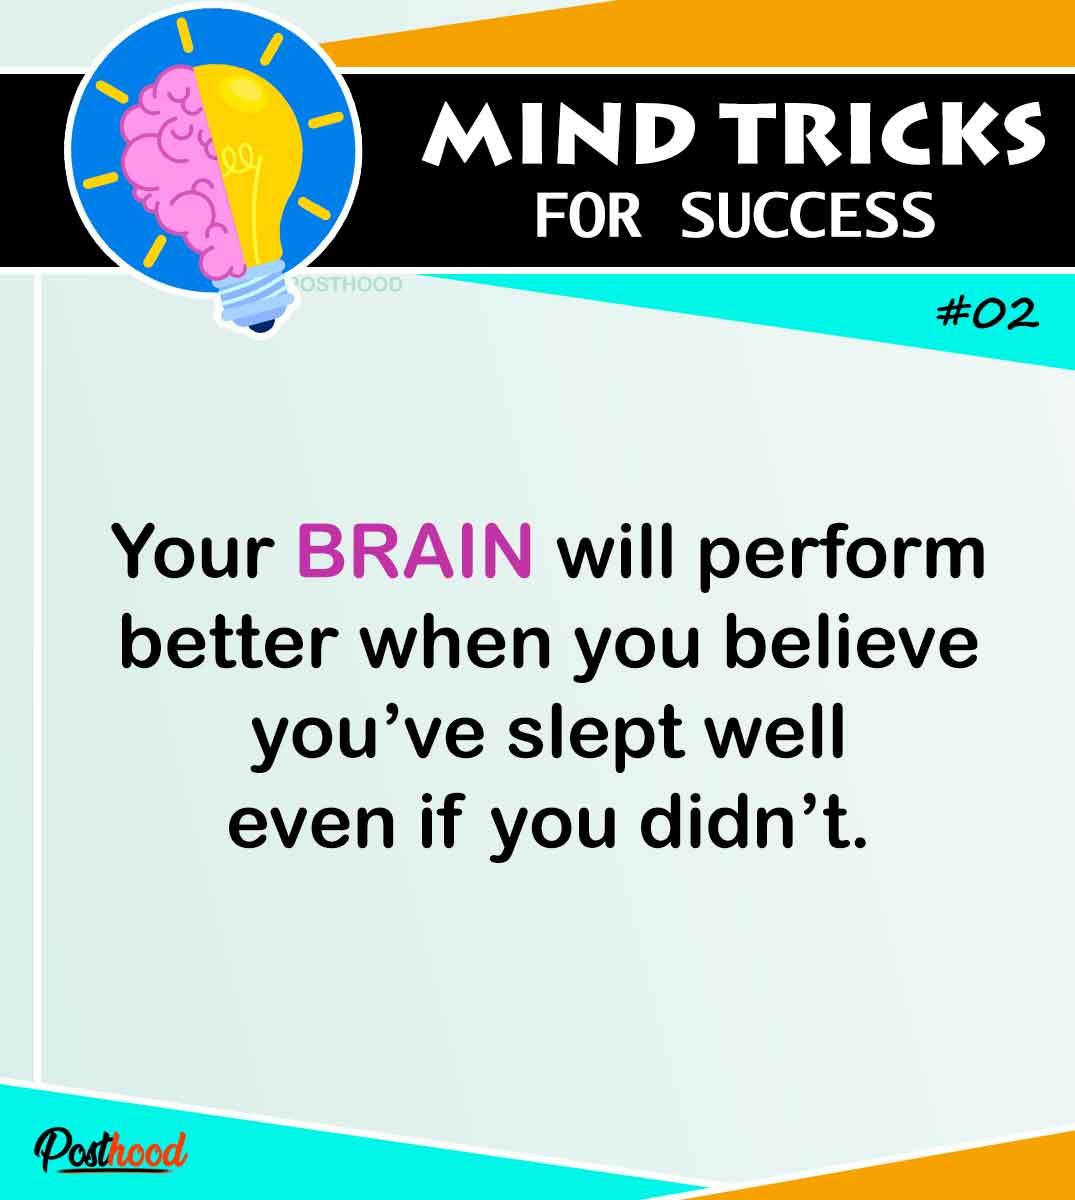 Ever trick your mind to perform better at the workplace? Use these mind-fooling tricks that can enhance your productivity and brain performance effortlessly.